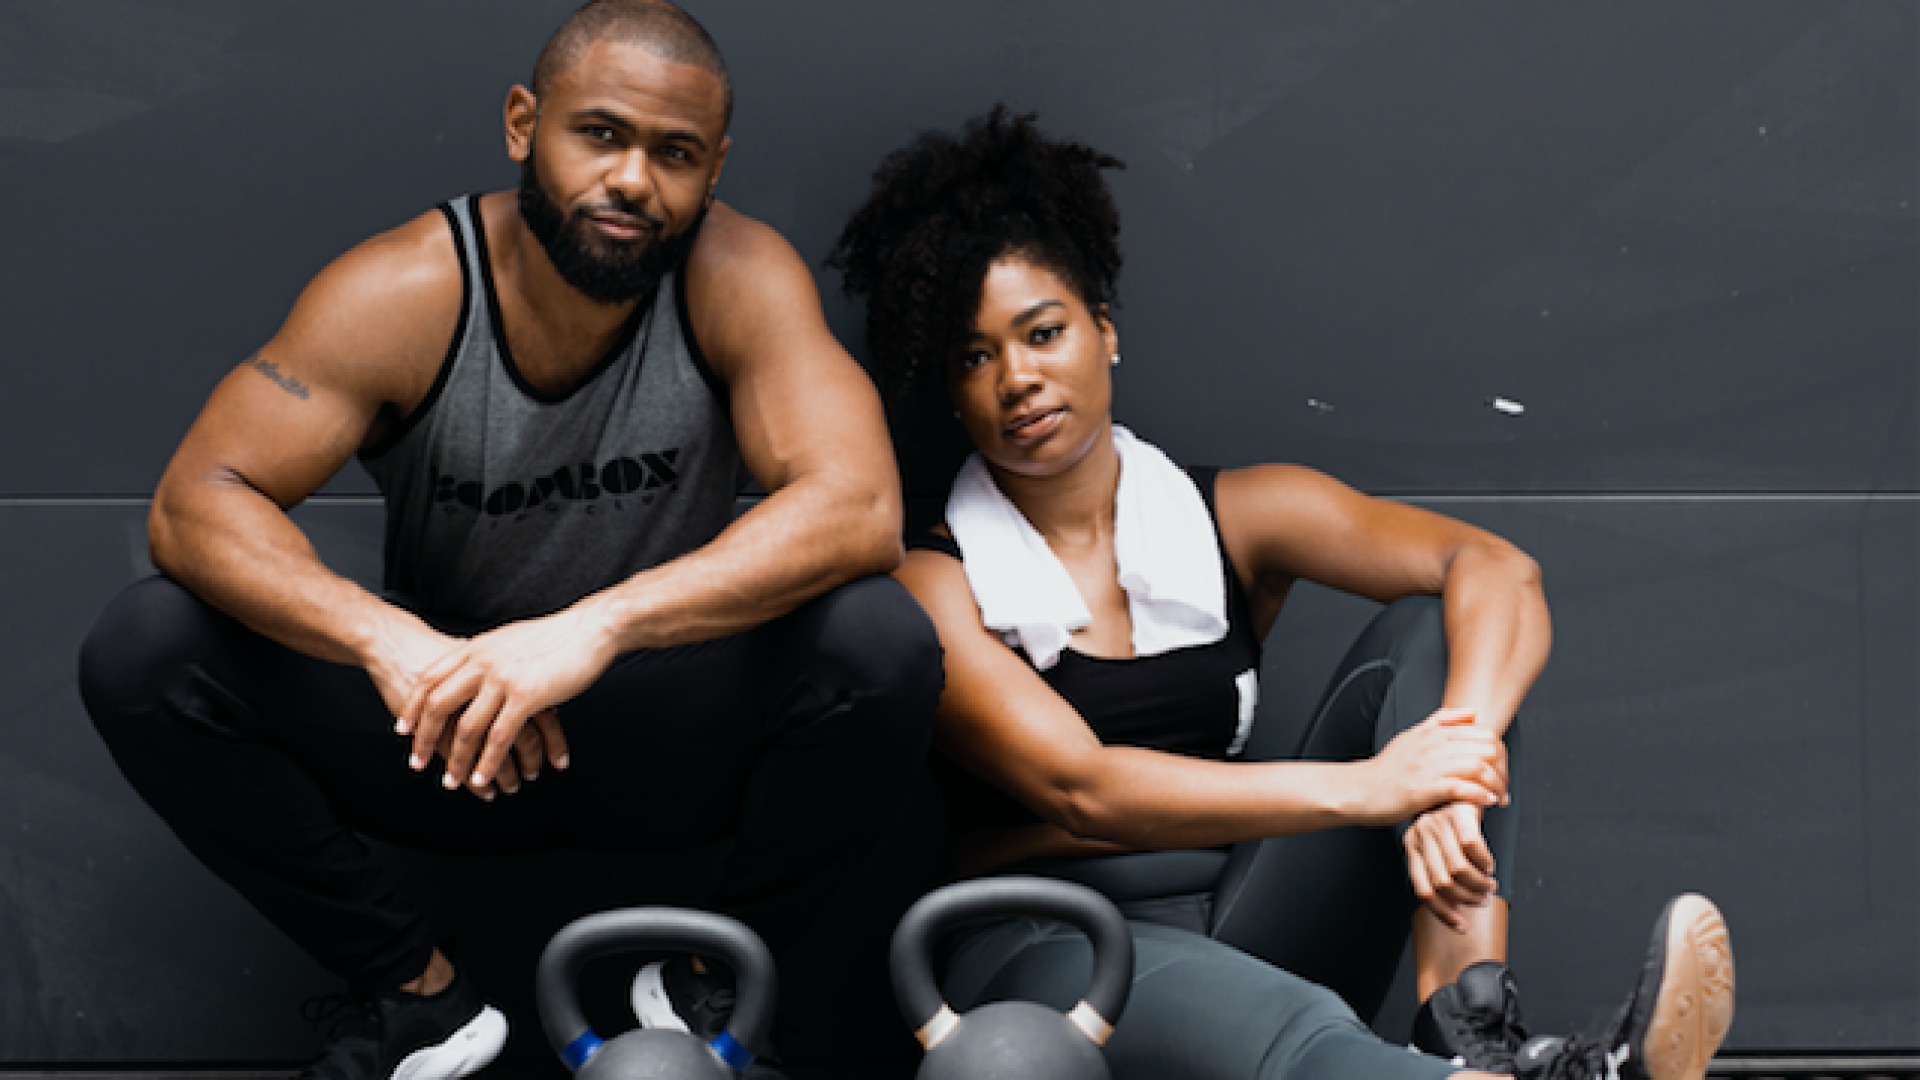 A Tinder Date Inspired D.C.'s Newest Black Owned Boxing Studio